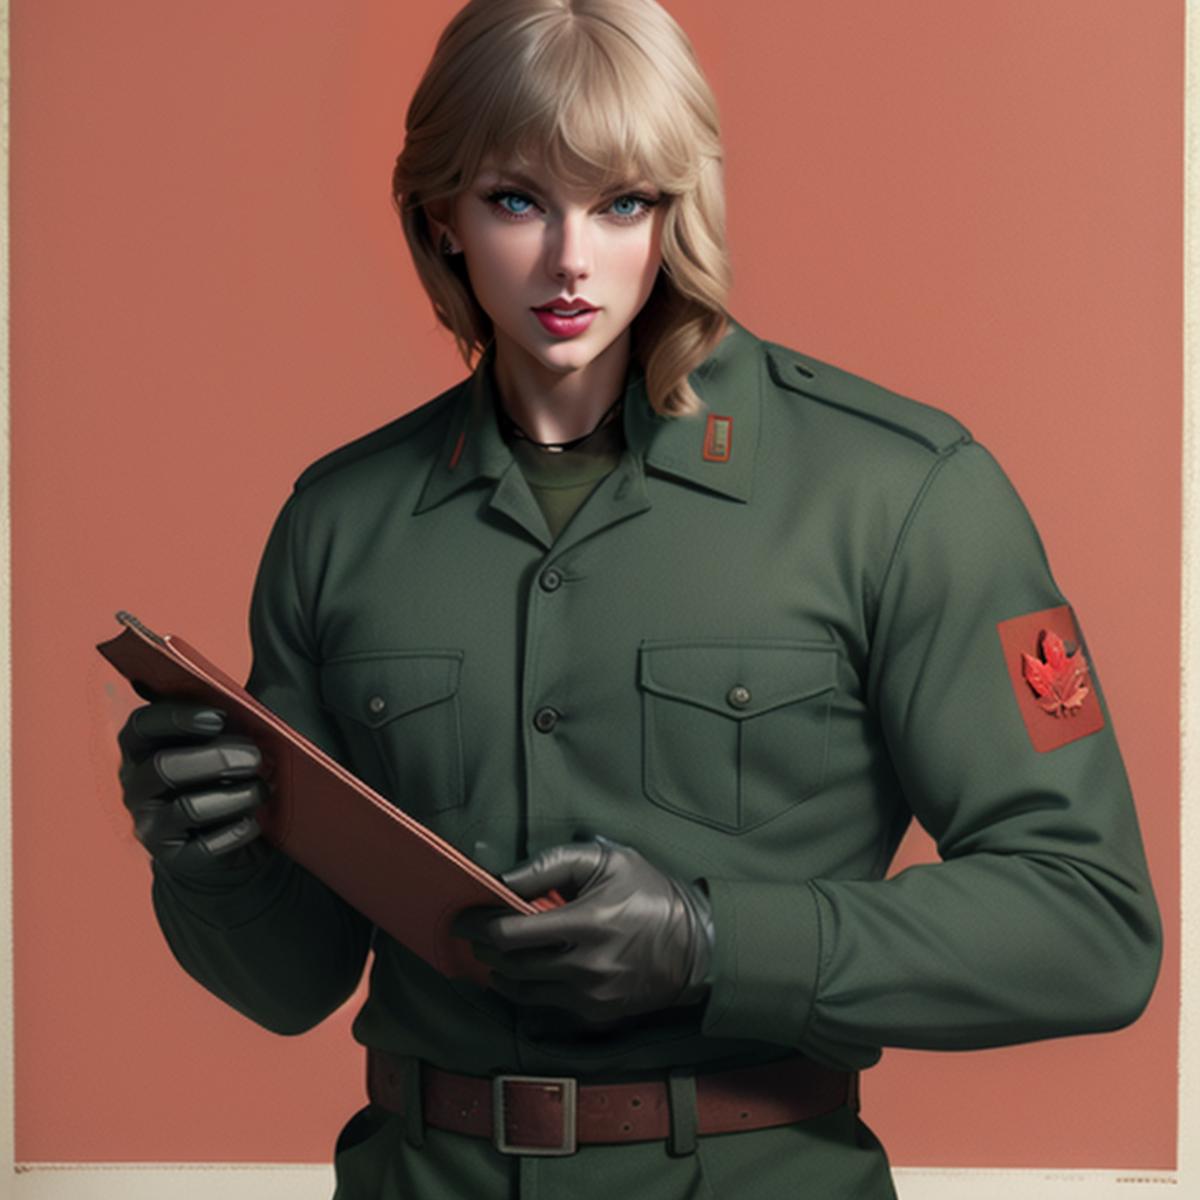 Taylor Swift image by M14w